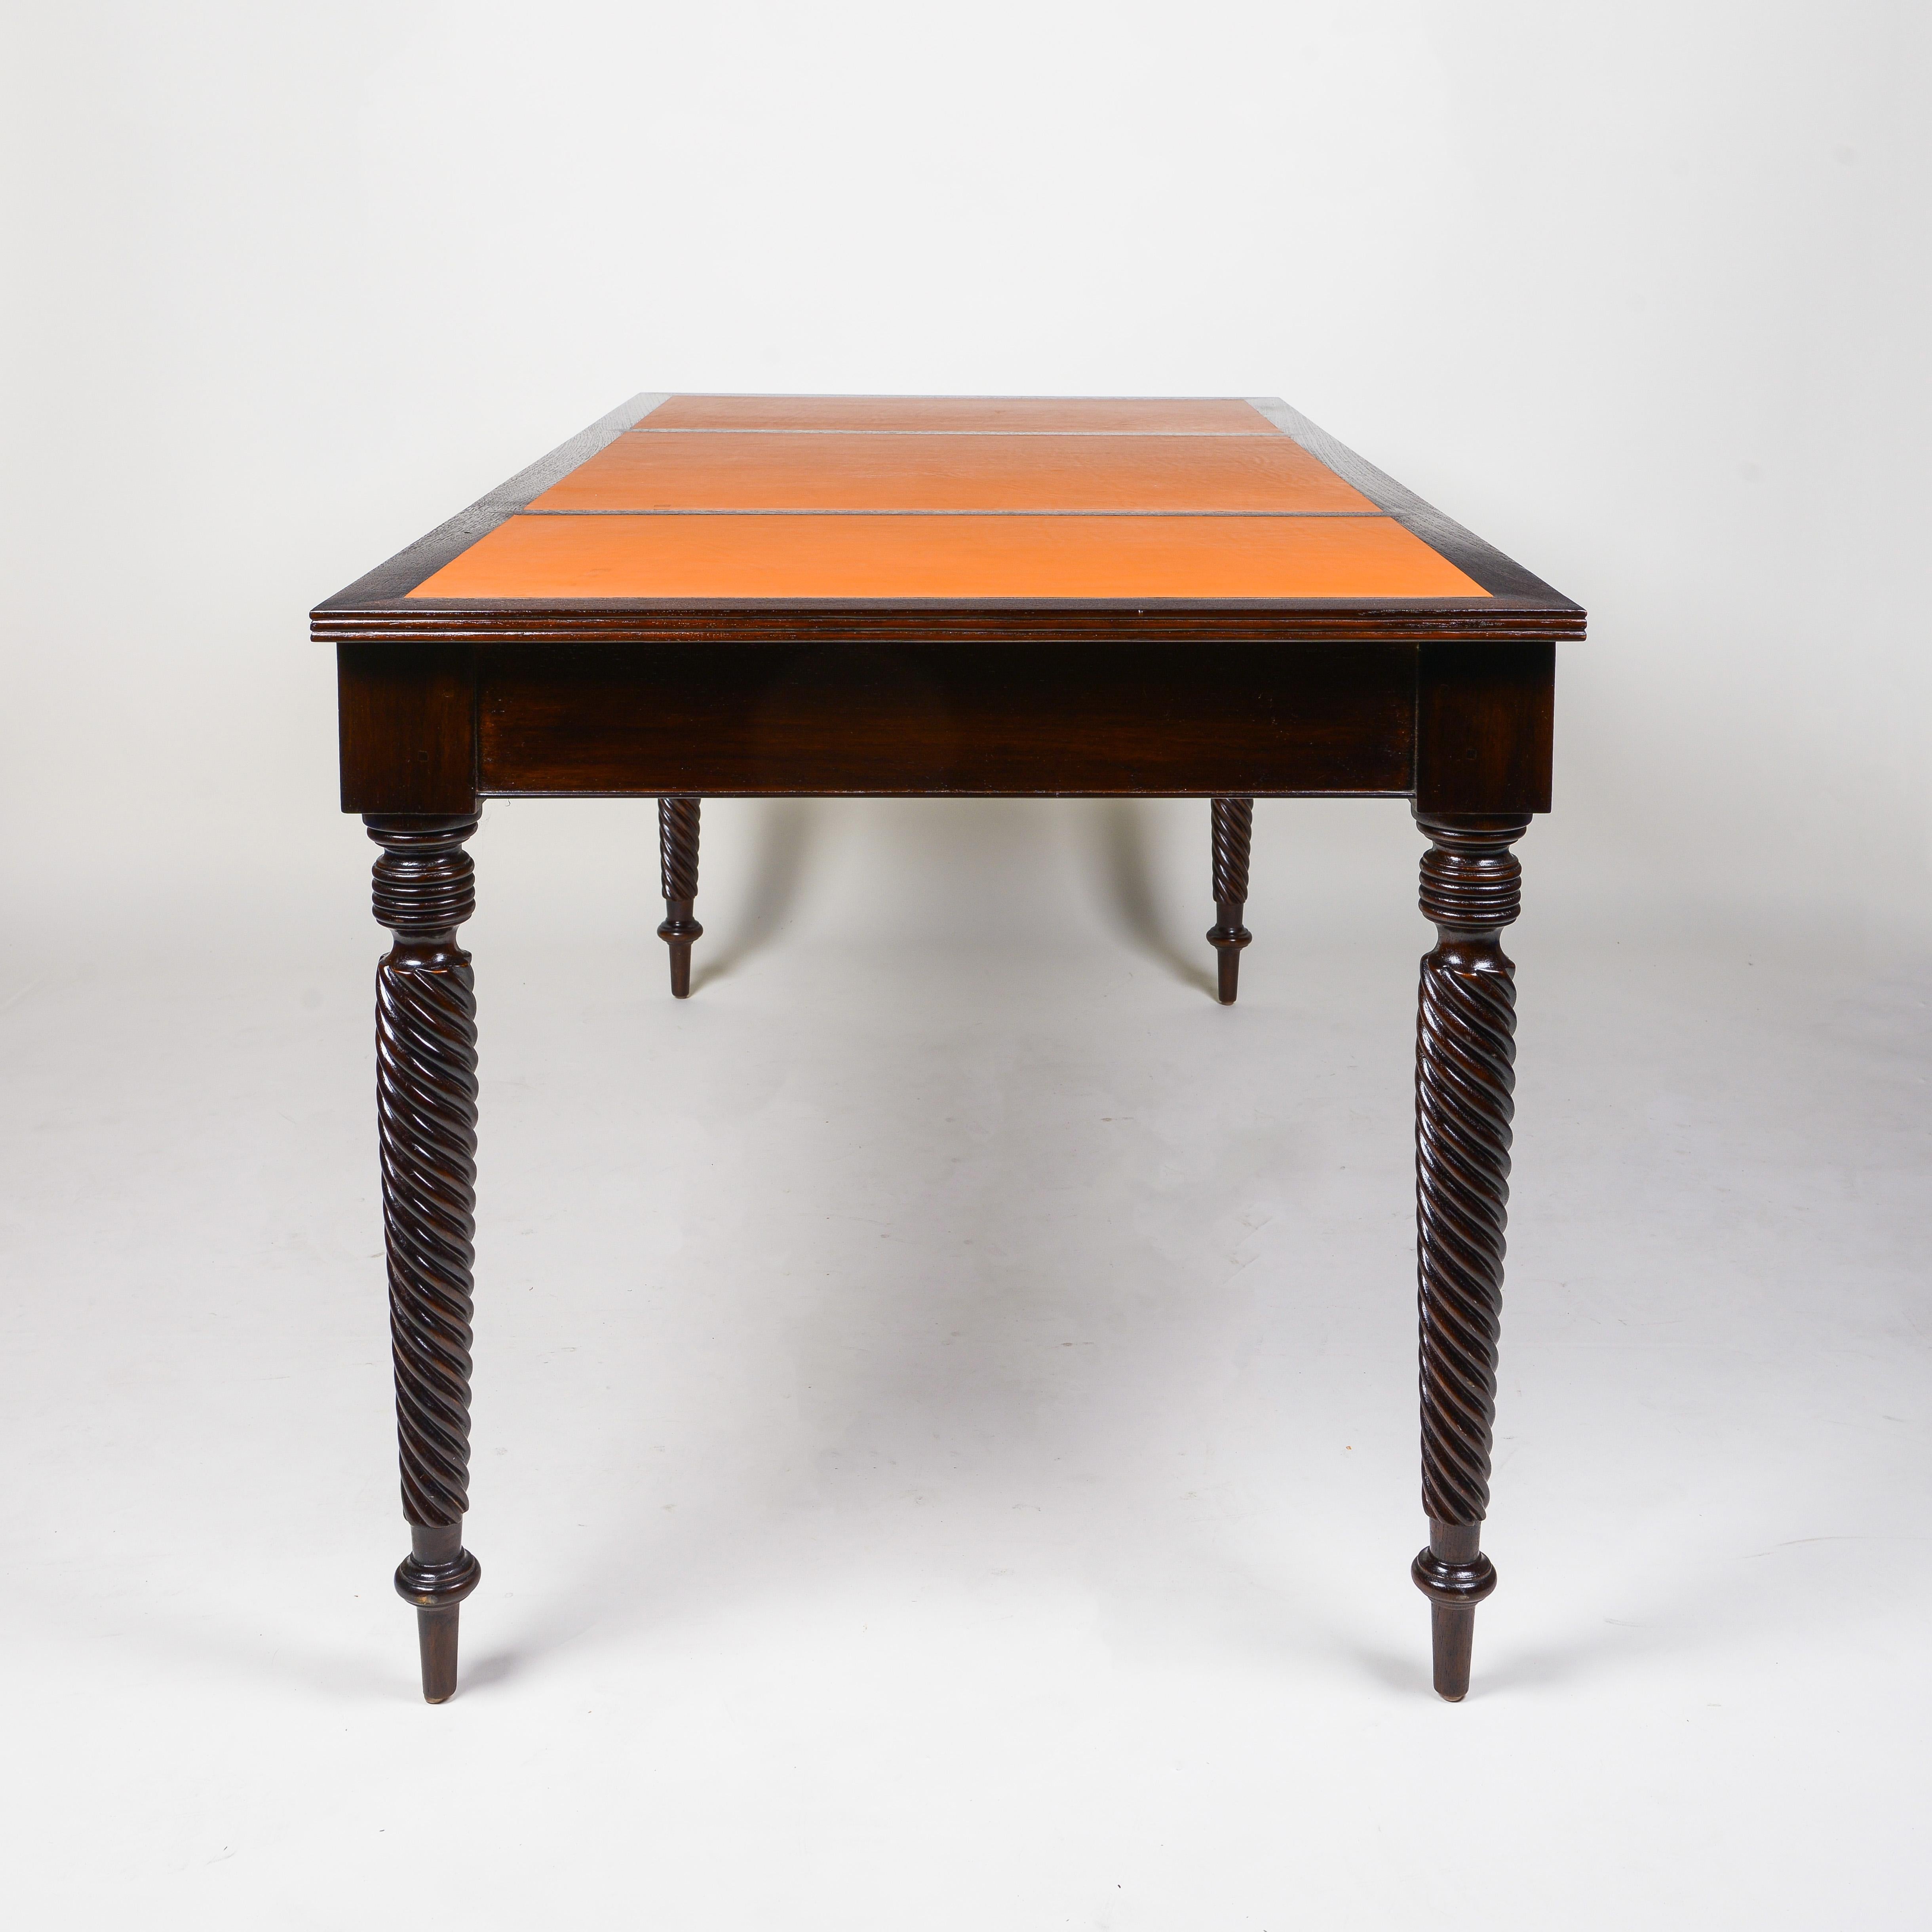 Neoclassical Style Mahogany-Stained Wood and Leather-Lined Writing Table In Excellent Condition For Sale In New York, NY